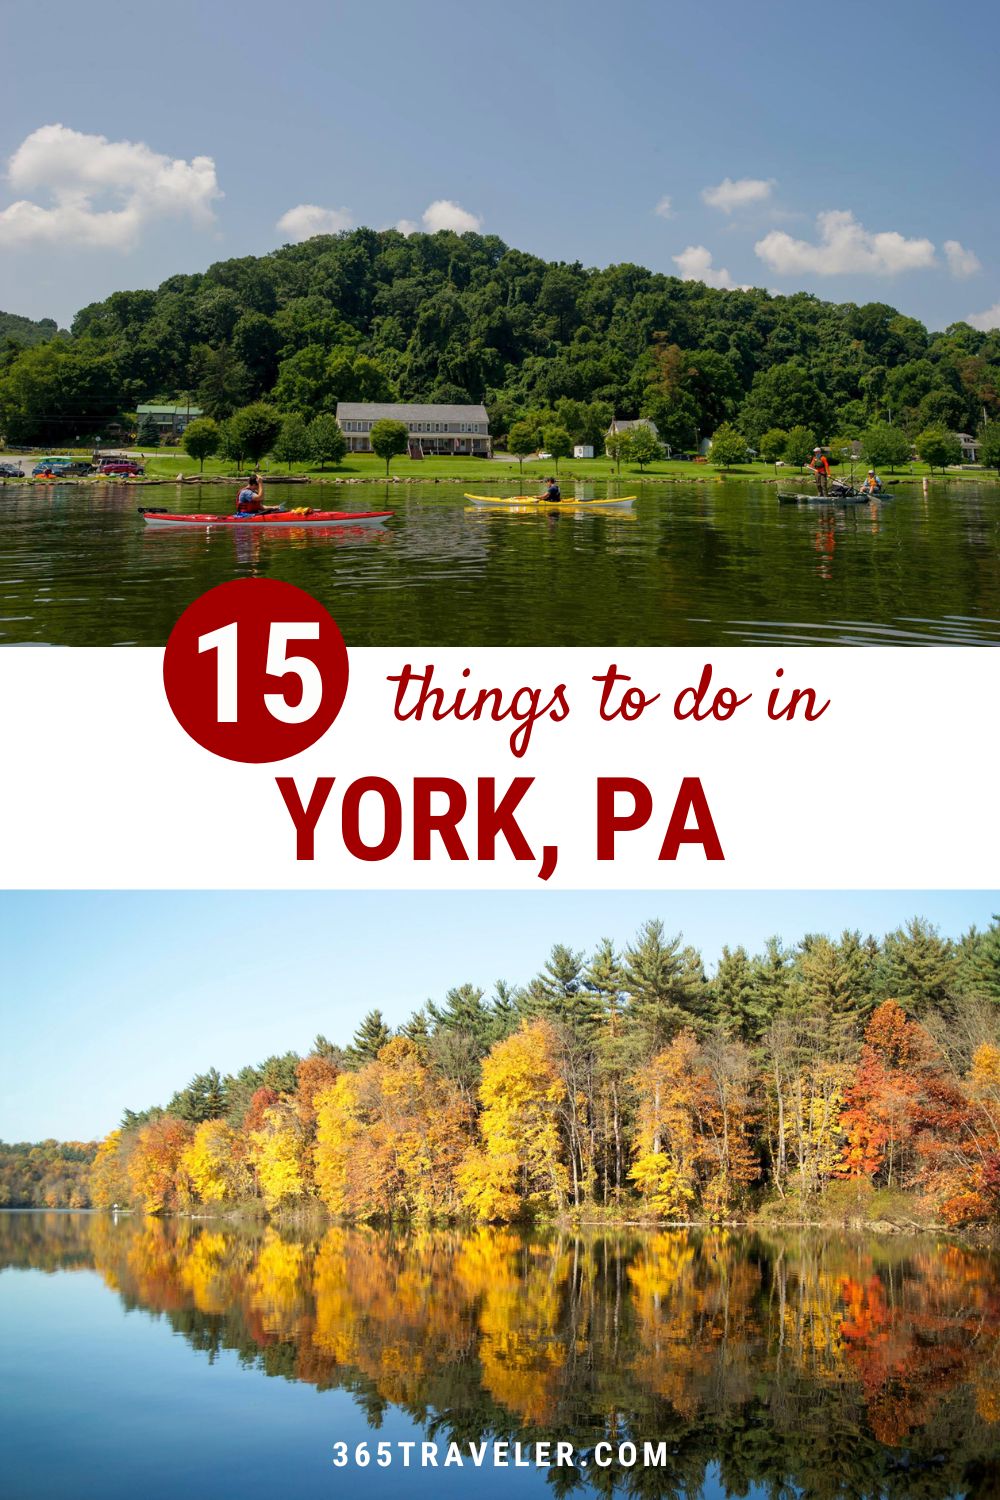 15 Amazing Things To Do in York Pa You’ll Love